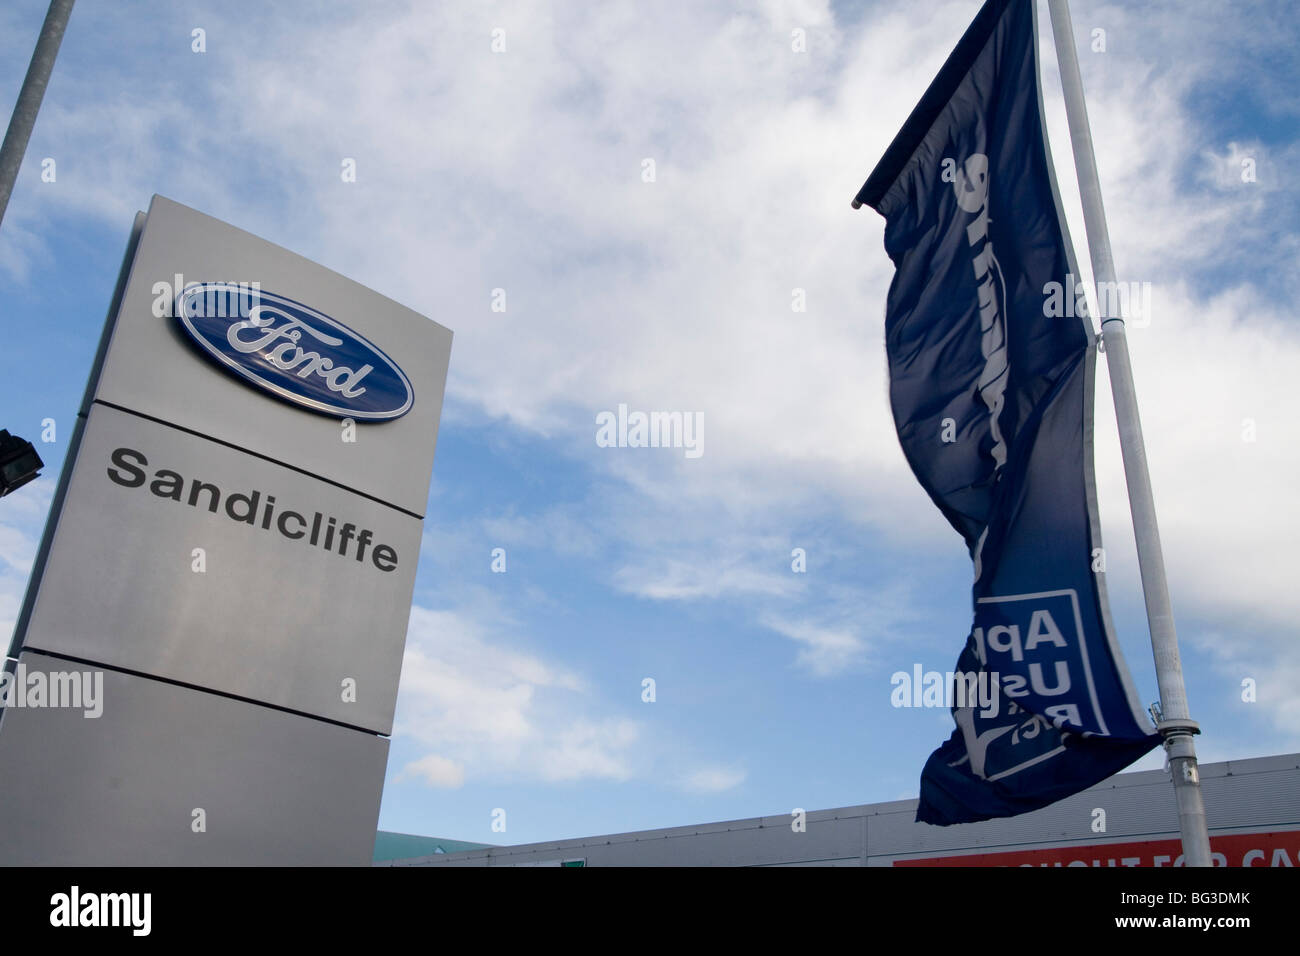 Sandicliffe Ford Stock Photo